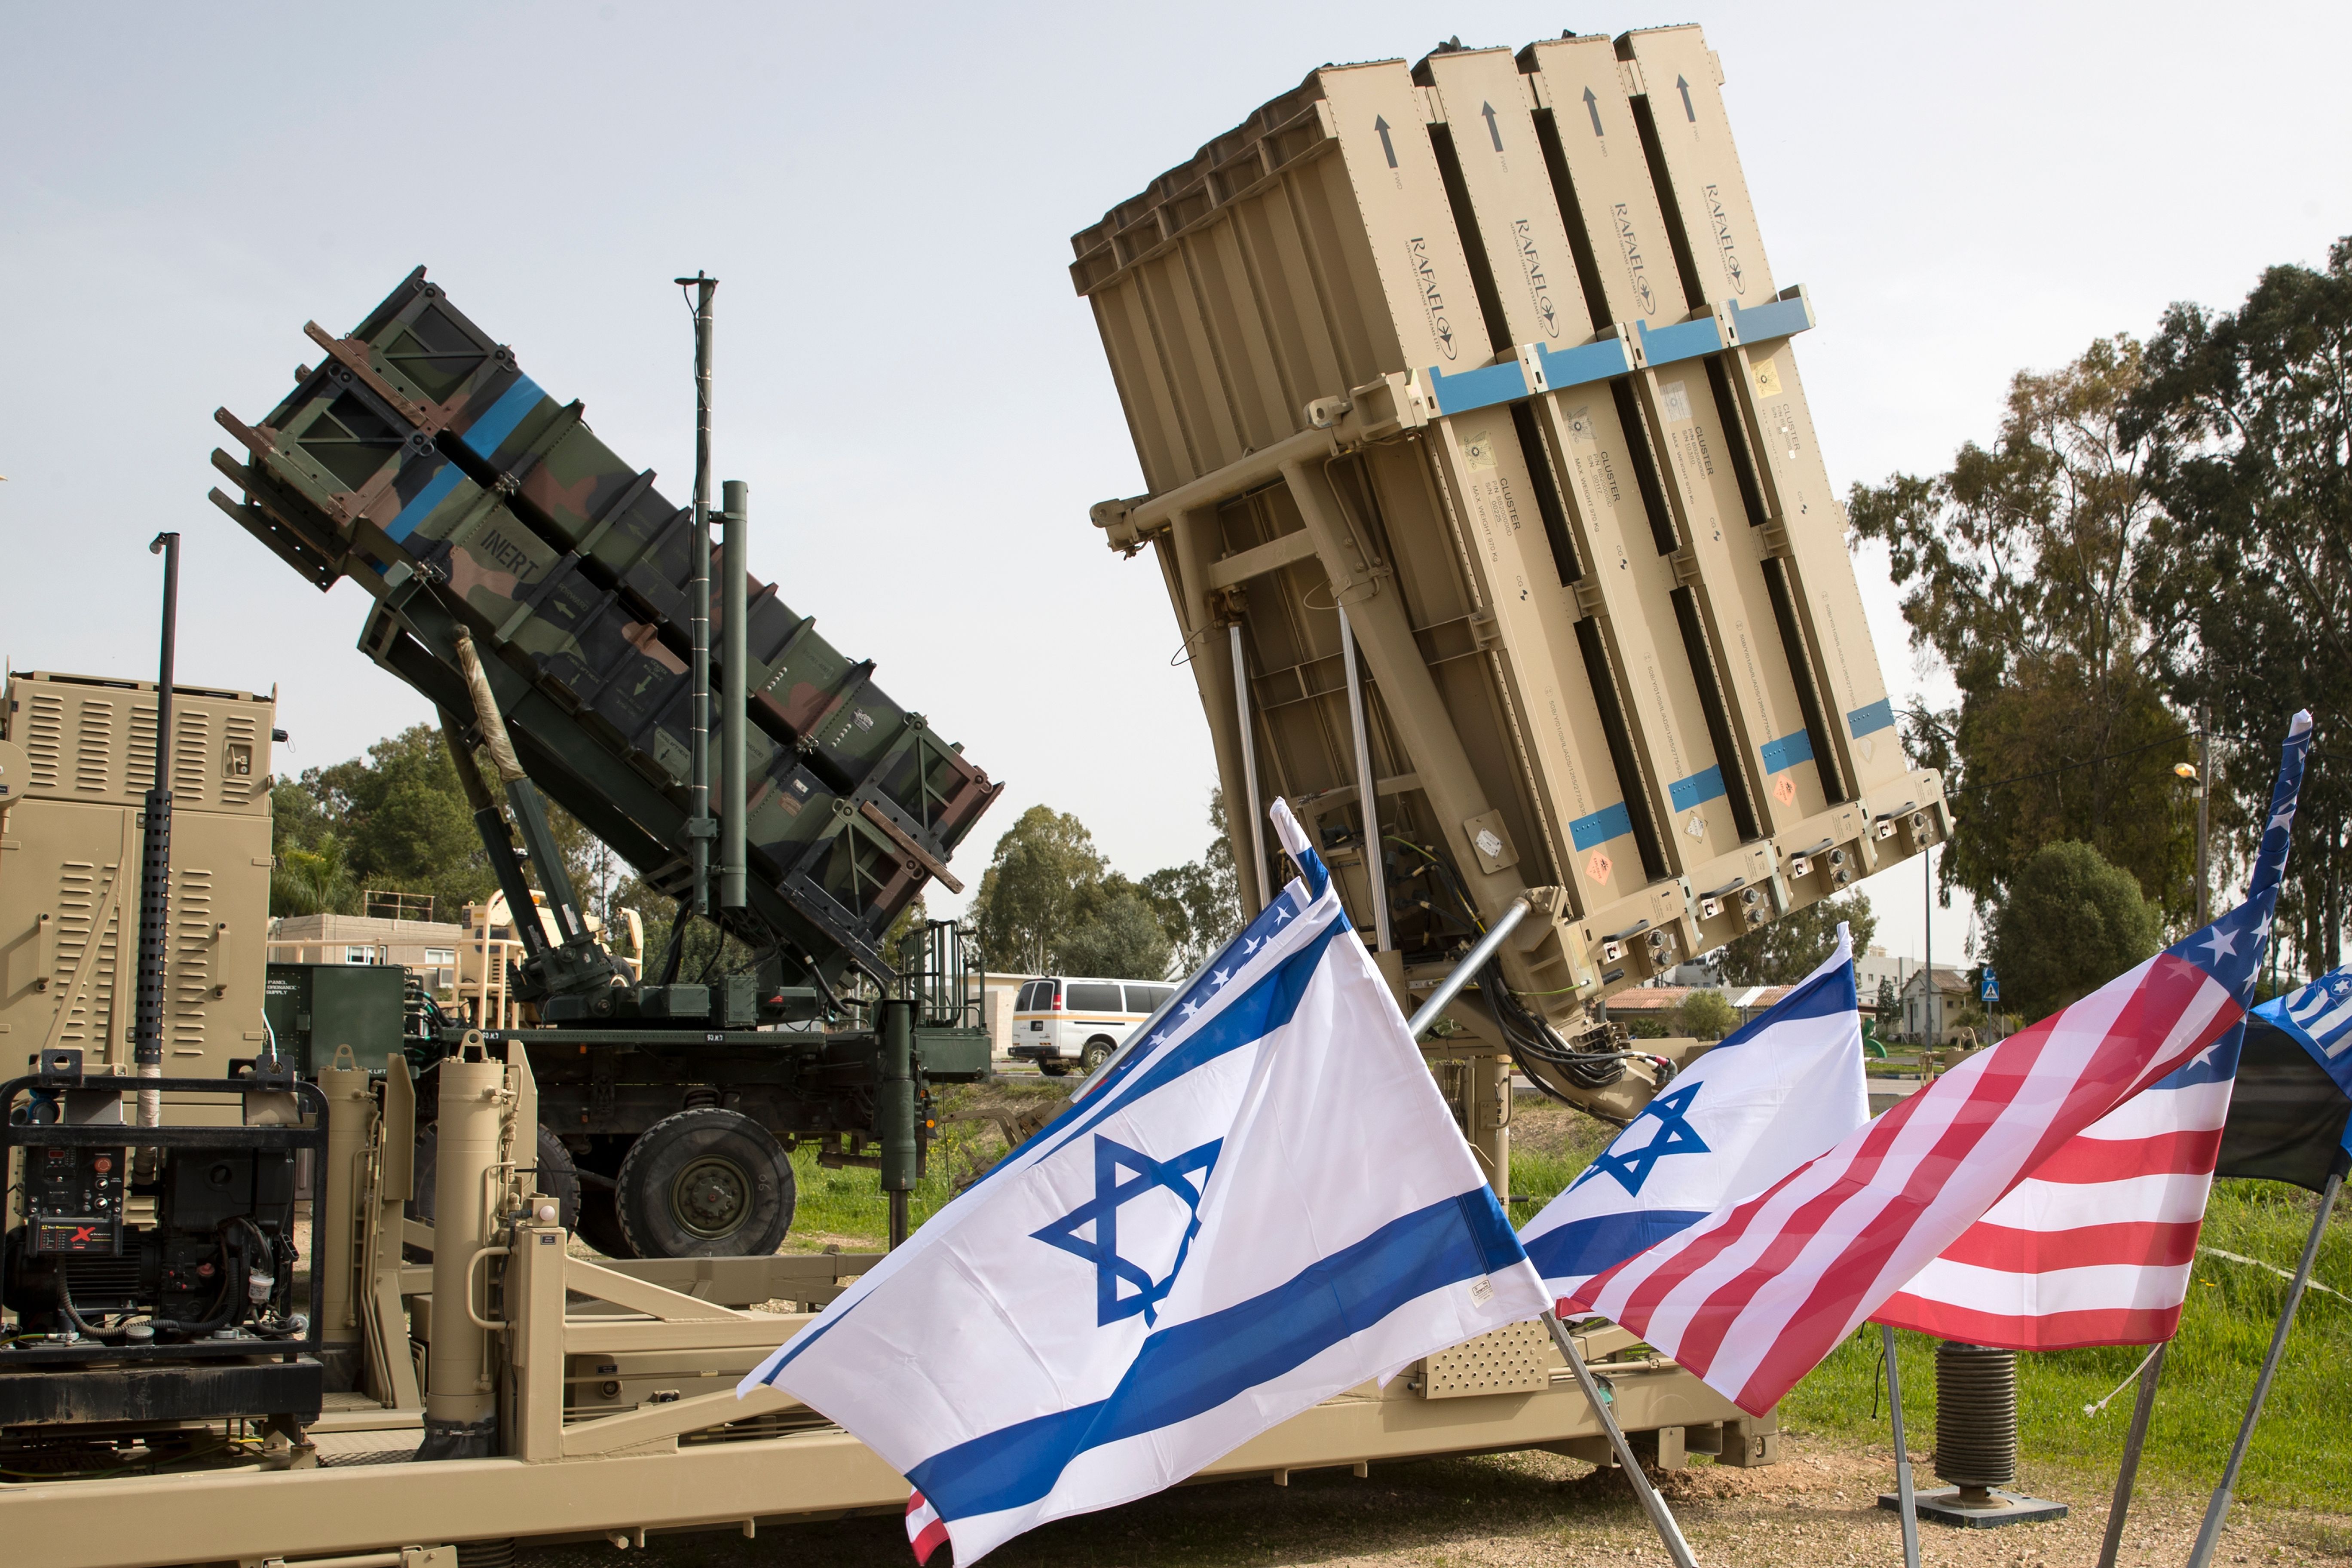 What is iron dome